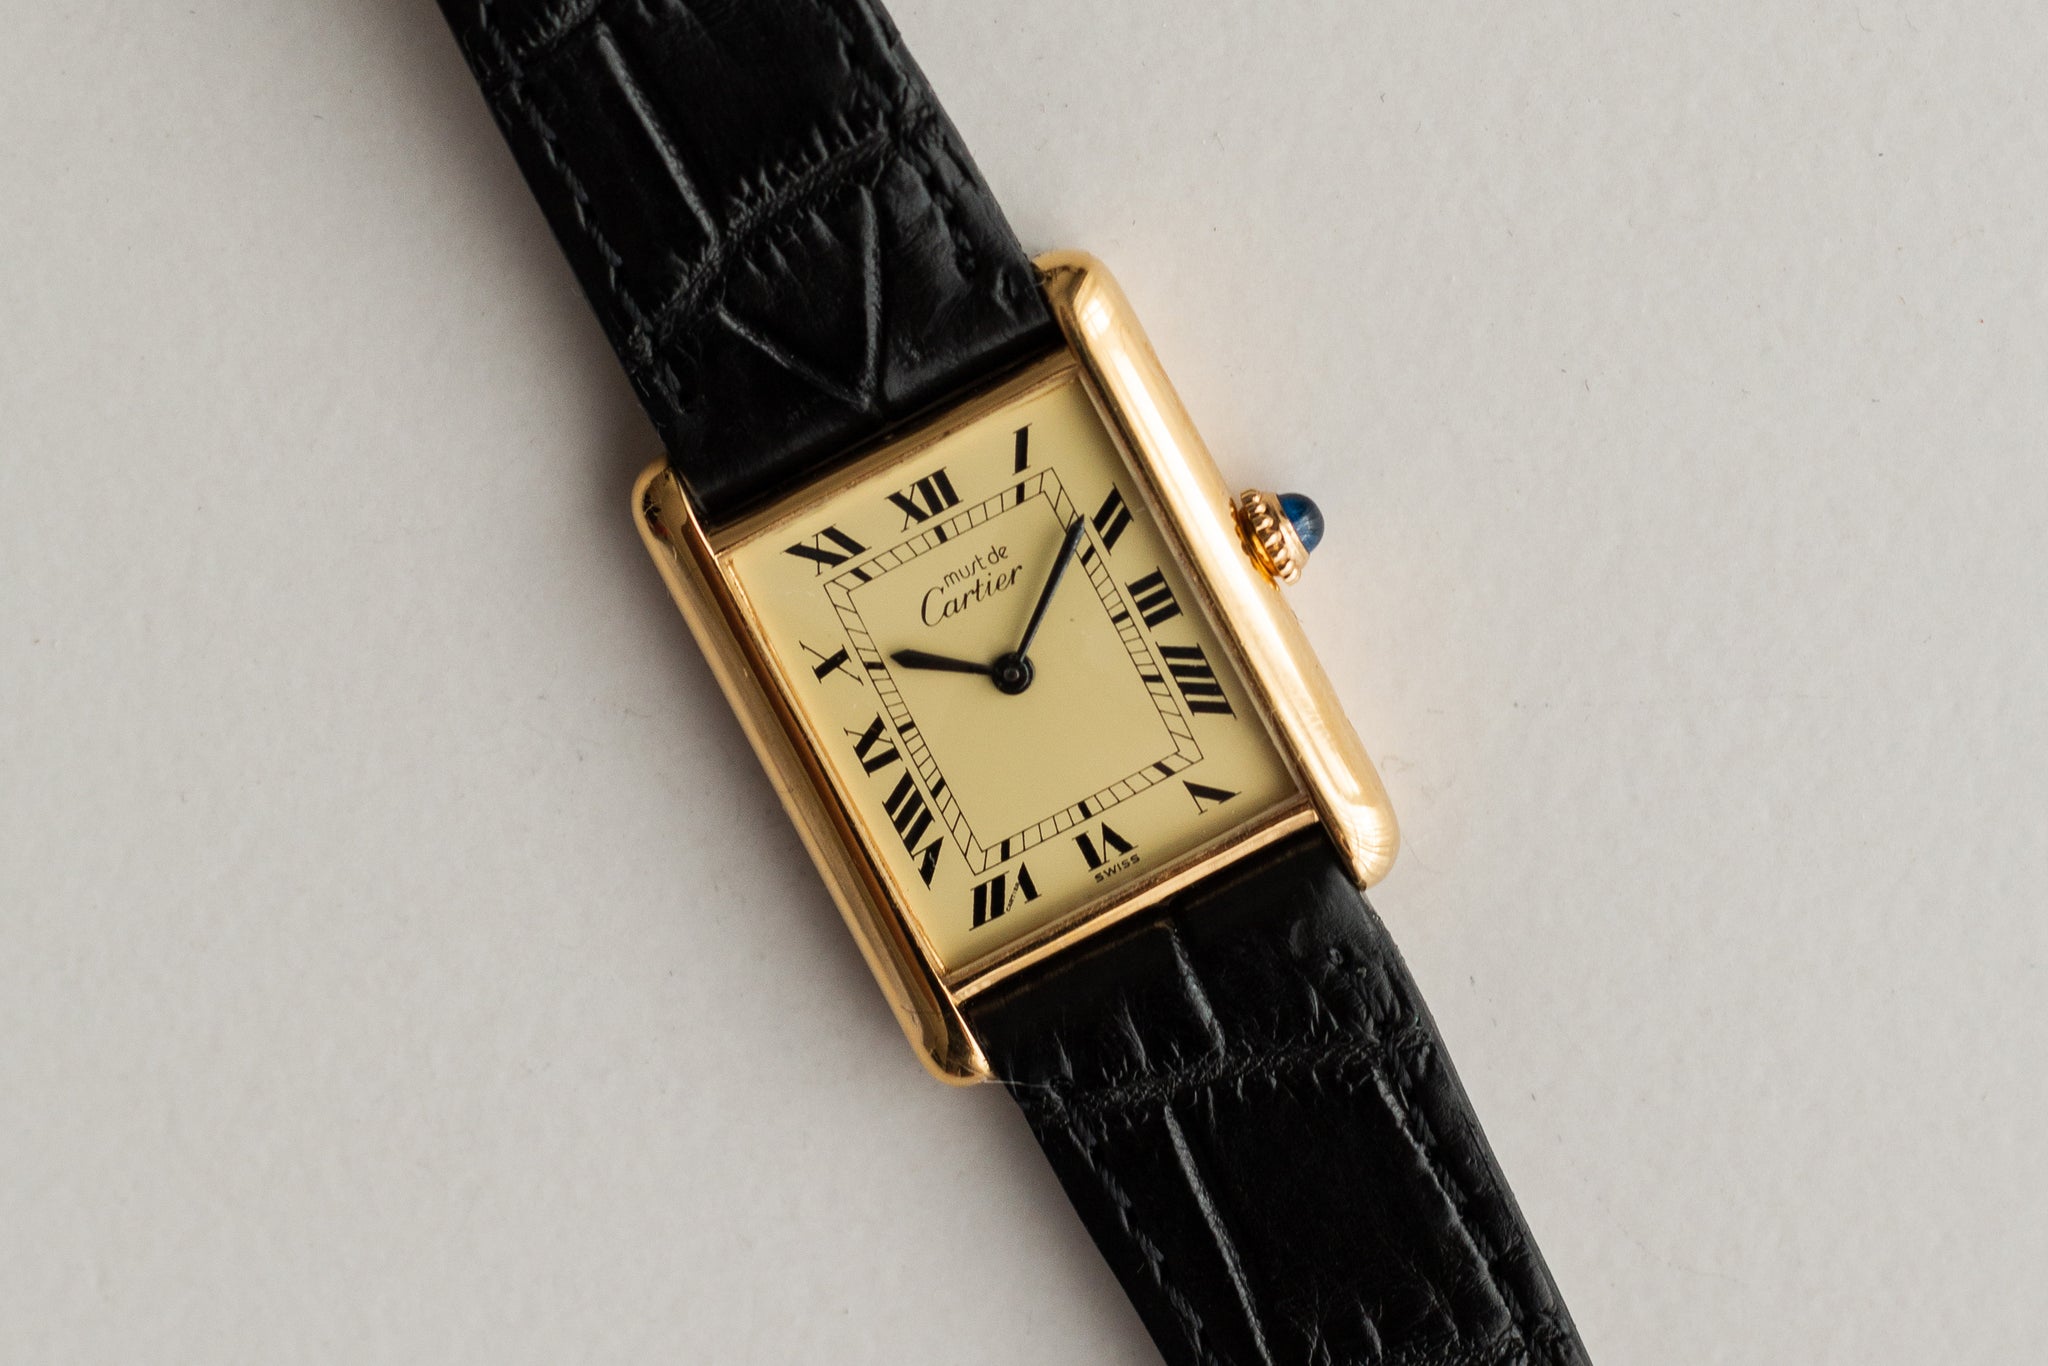 A Guided History Lesson of the Cartier Tank